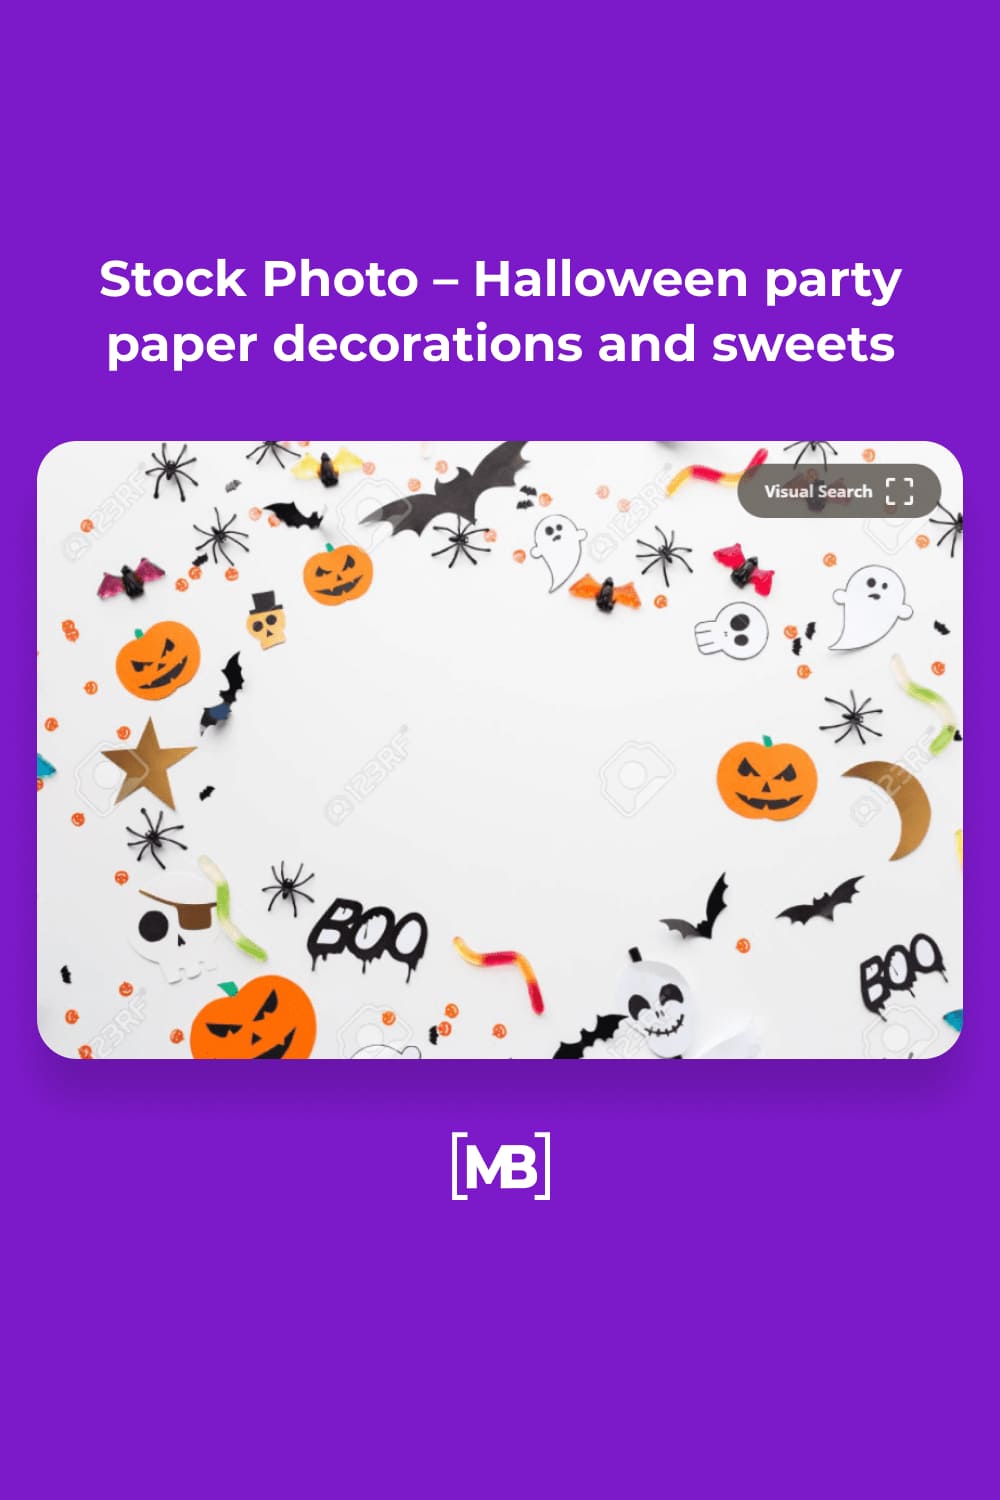 Images of pumpkins, bats, ghosts, spiders on a white background.